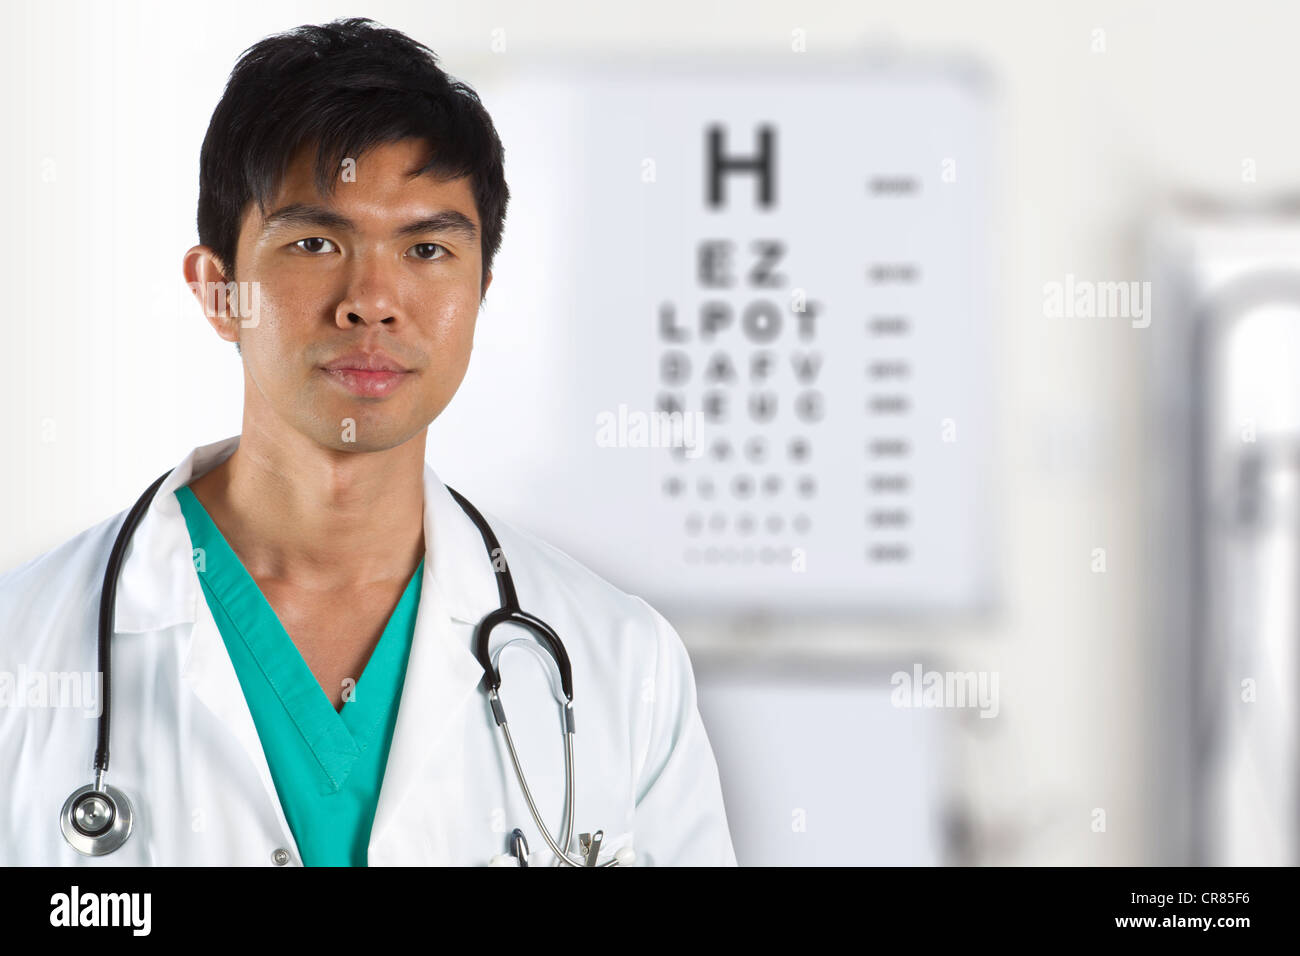 Asian doctor with an eye test chart out of focus in the background Stock Photo